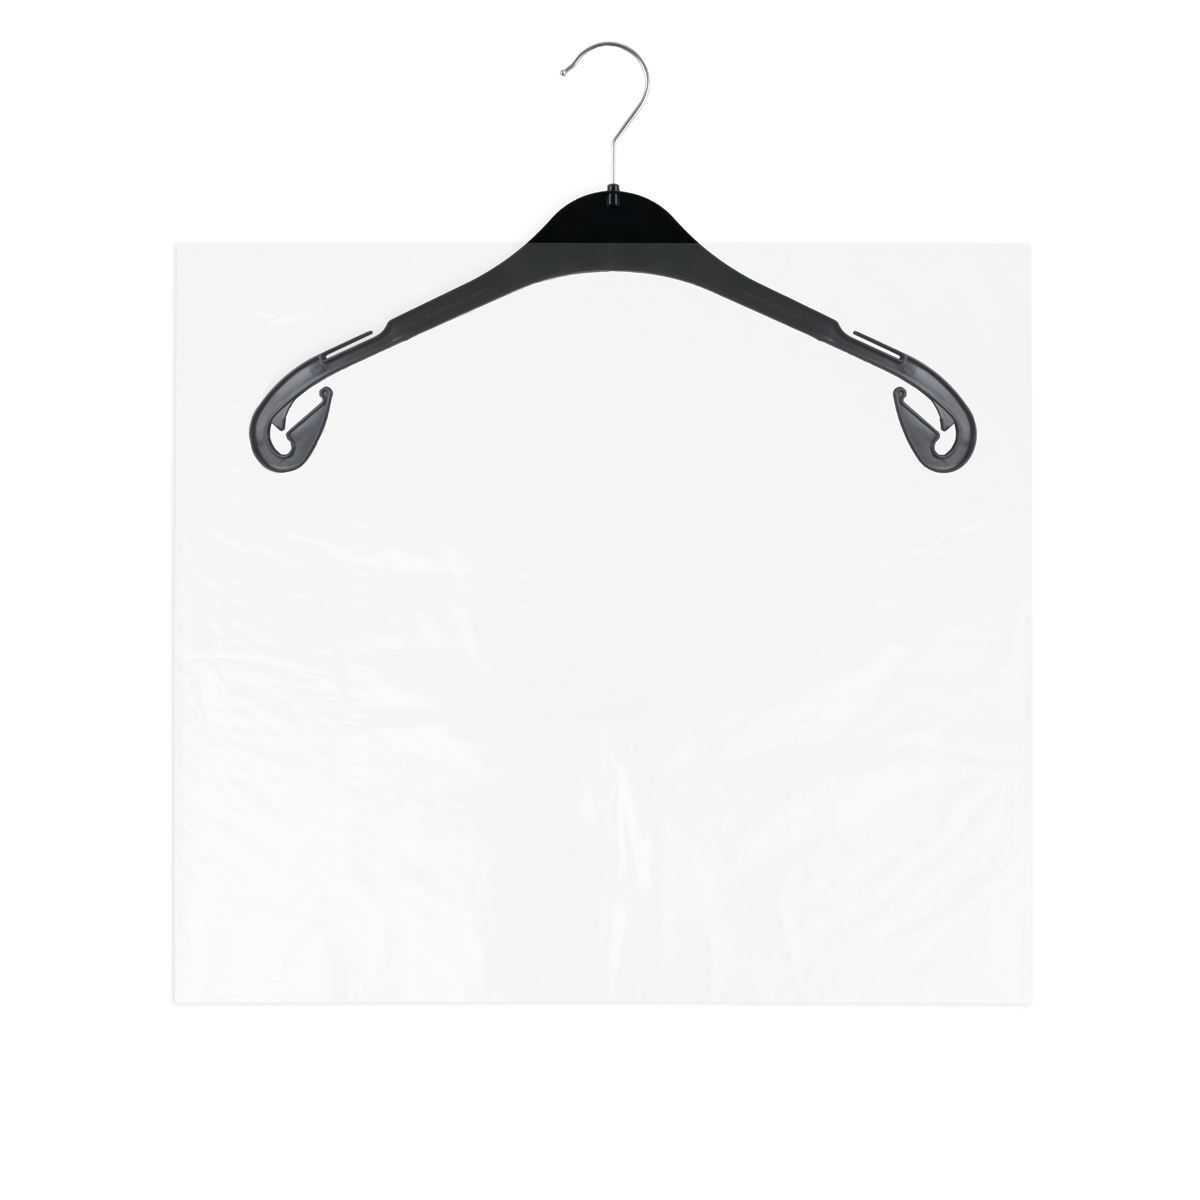 Plastic dry cleaning covers